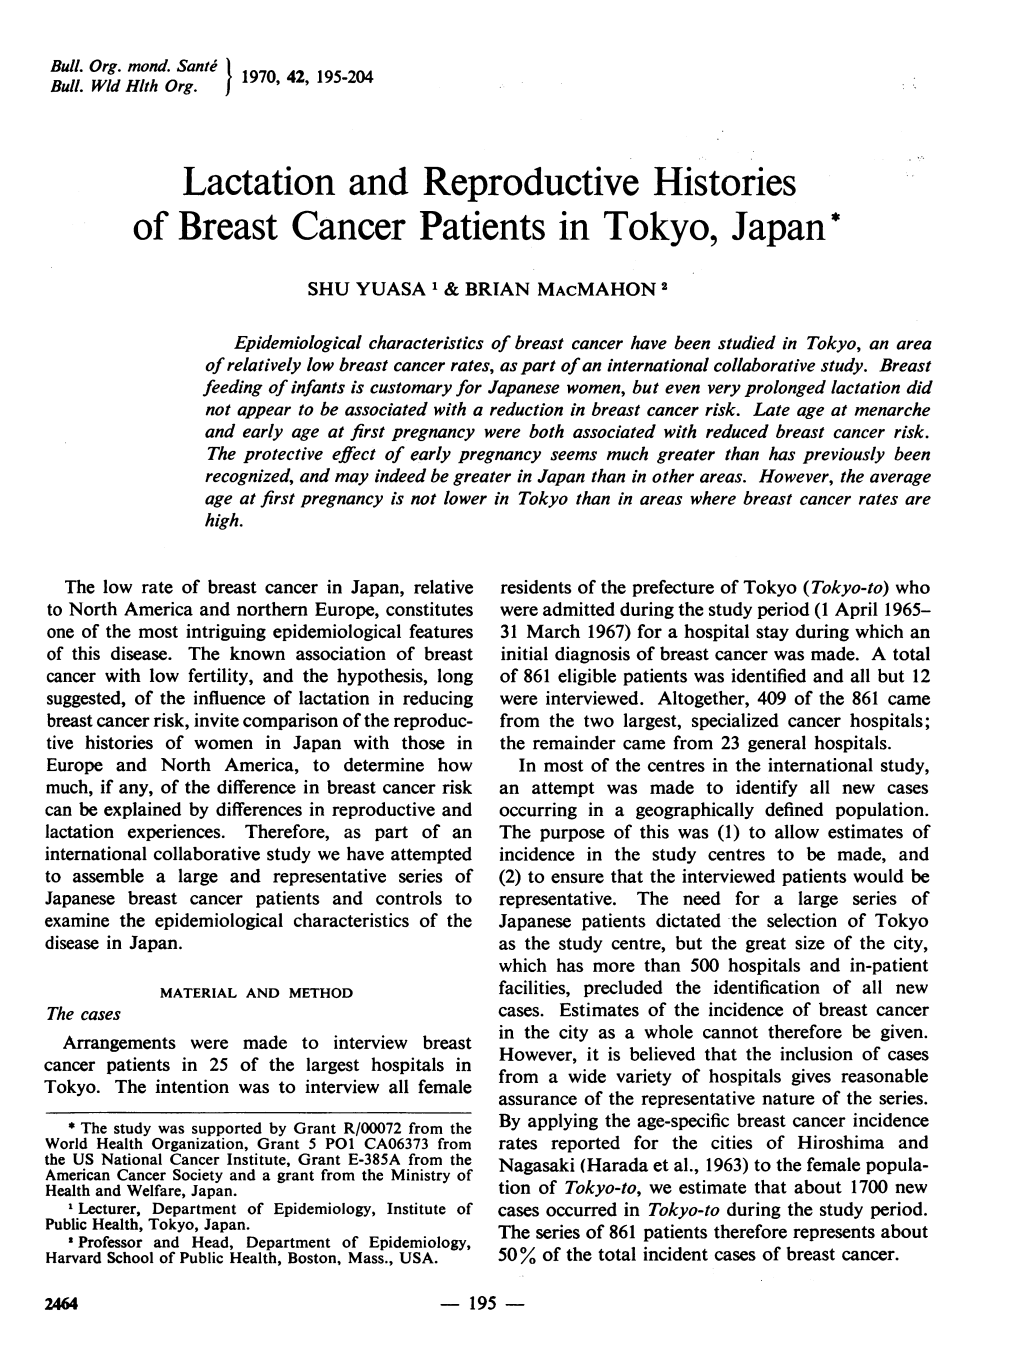 Lactation and Reproductive Histories of Breast Cancer Patients in Tokyo, Japan*